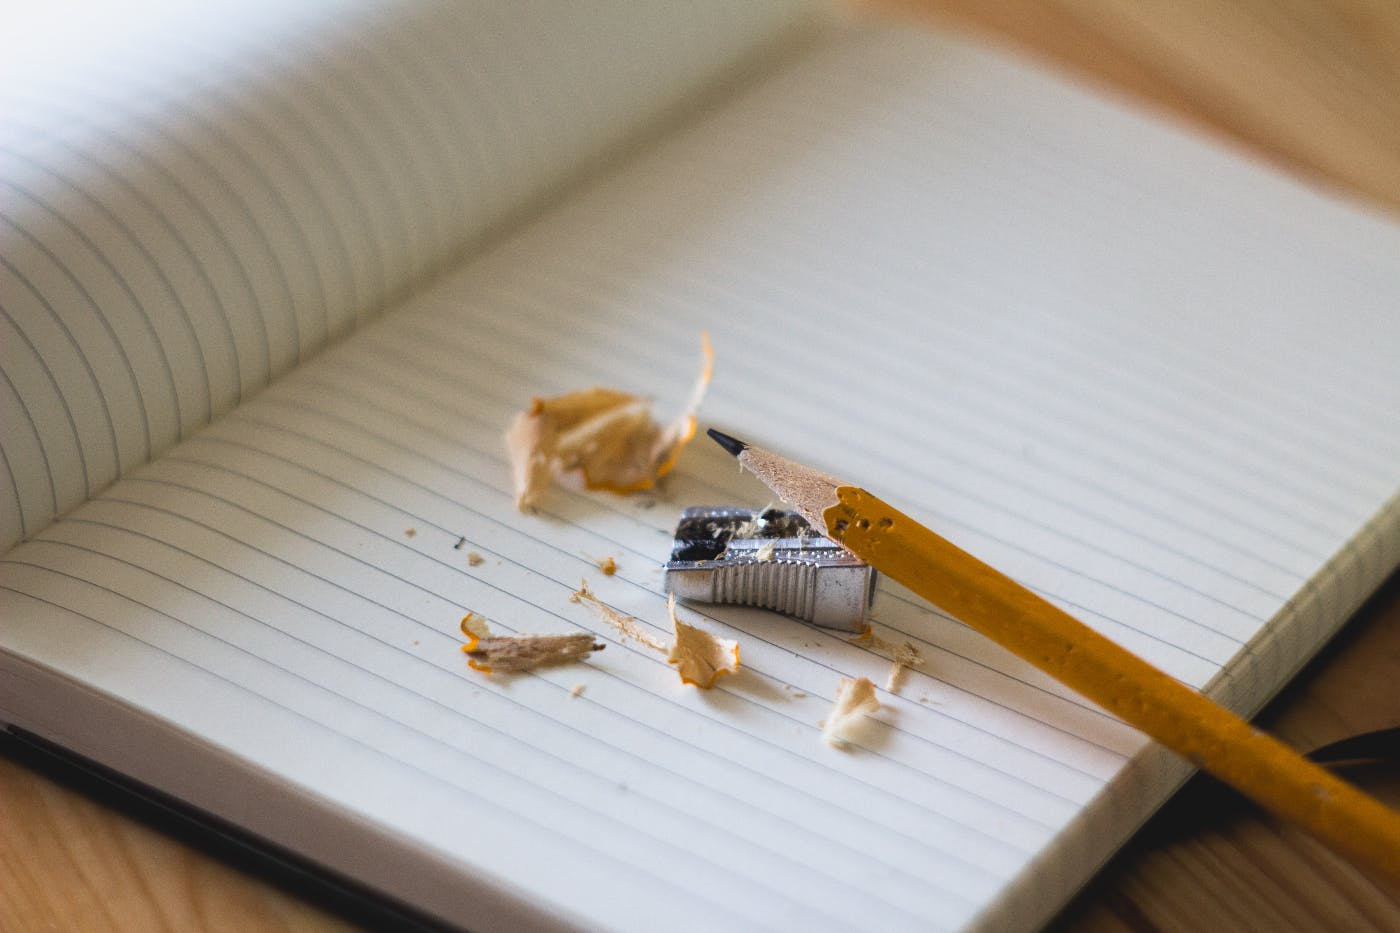 The blank page of a journal with a metal pencil sharpener, a pencil and pencil shavings on it.